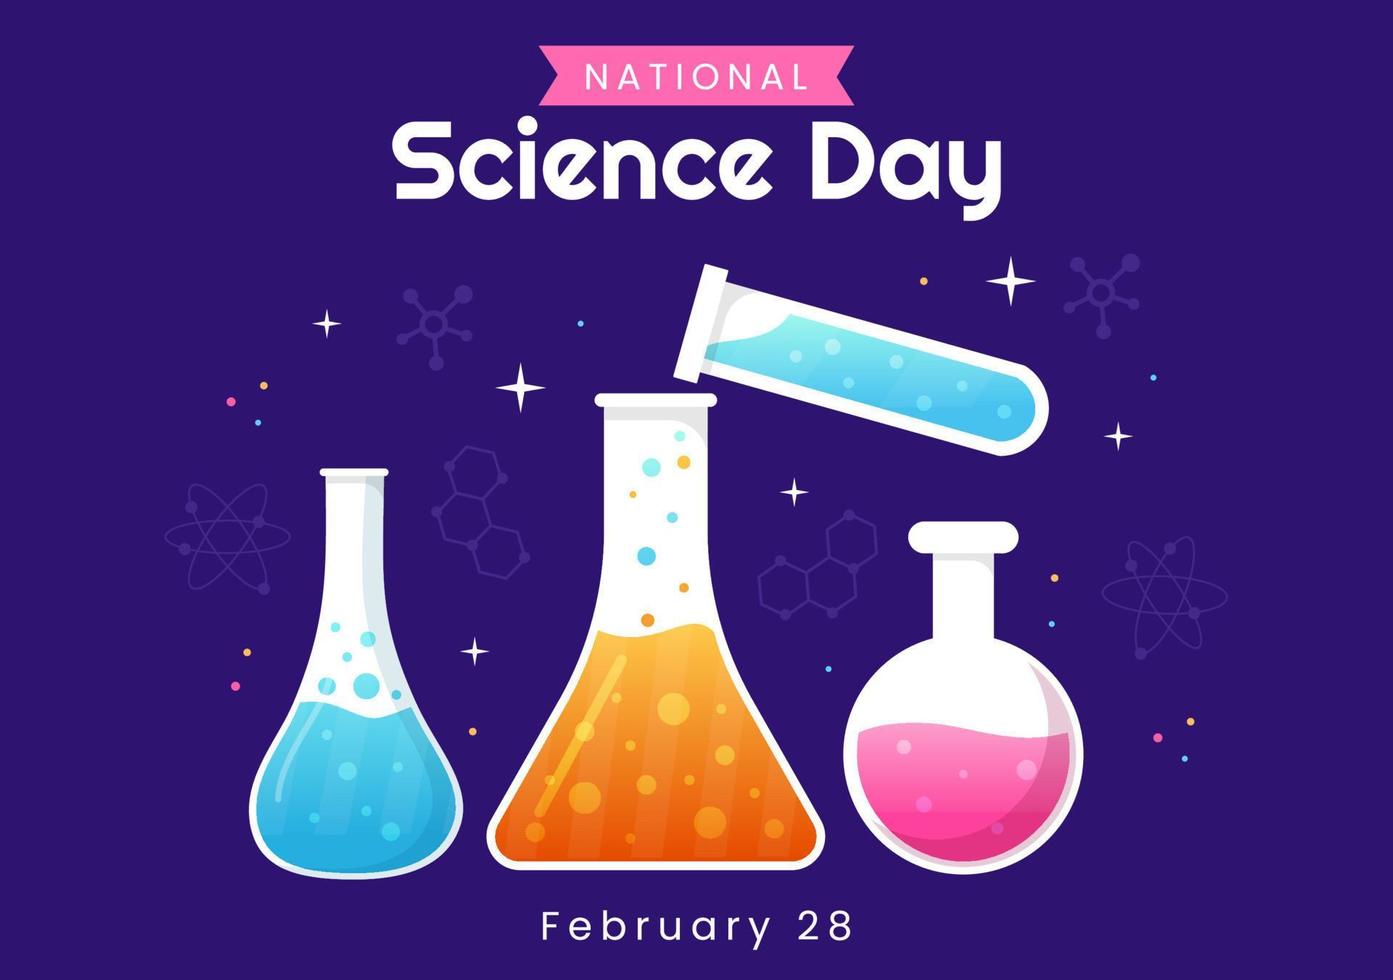 National Science Day February 28 Related to Chemical Liquid, Scientific, Medical and Research in Flat Cartoon Hand Drawn Templates Illustration vector